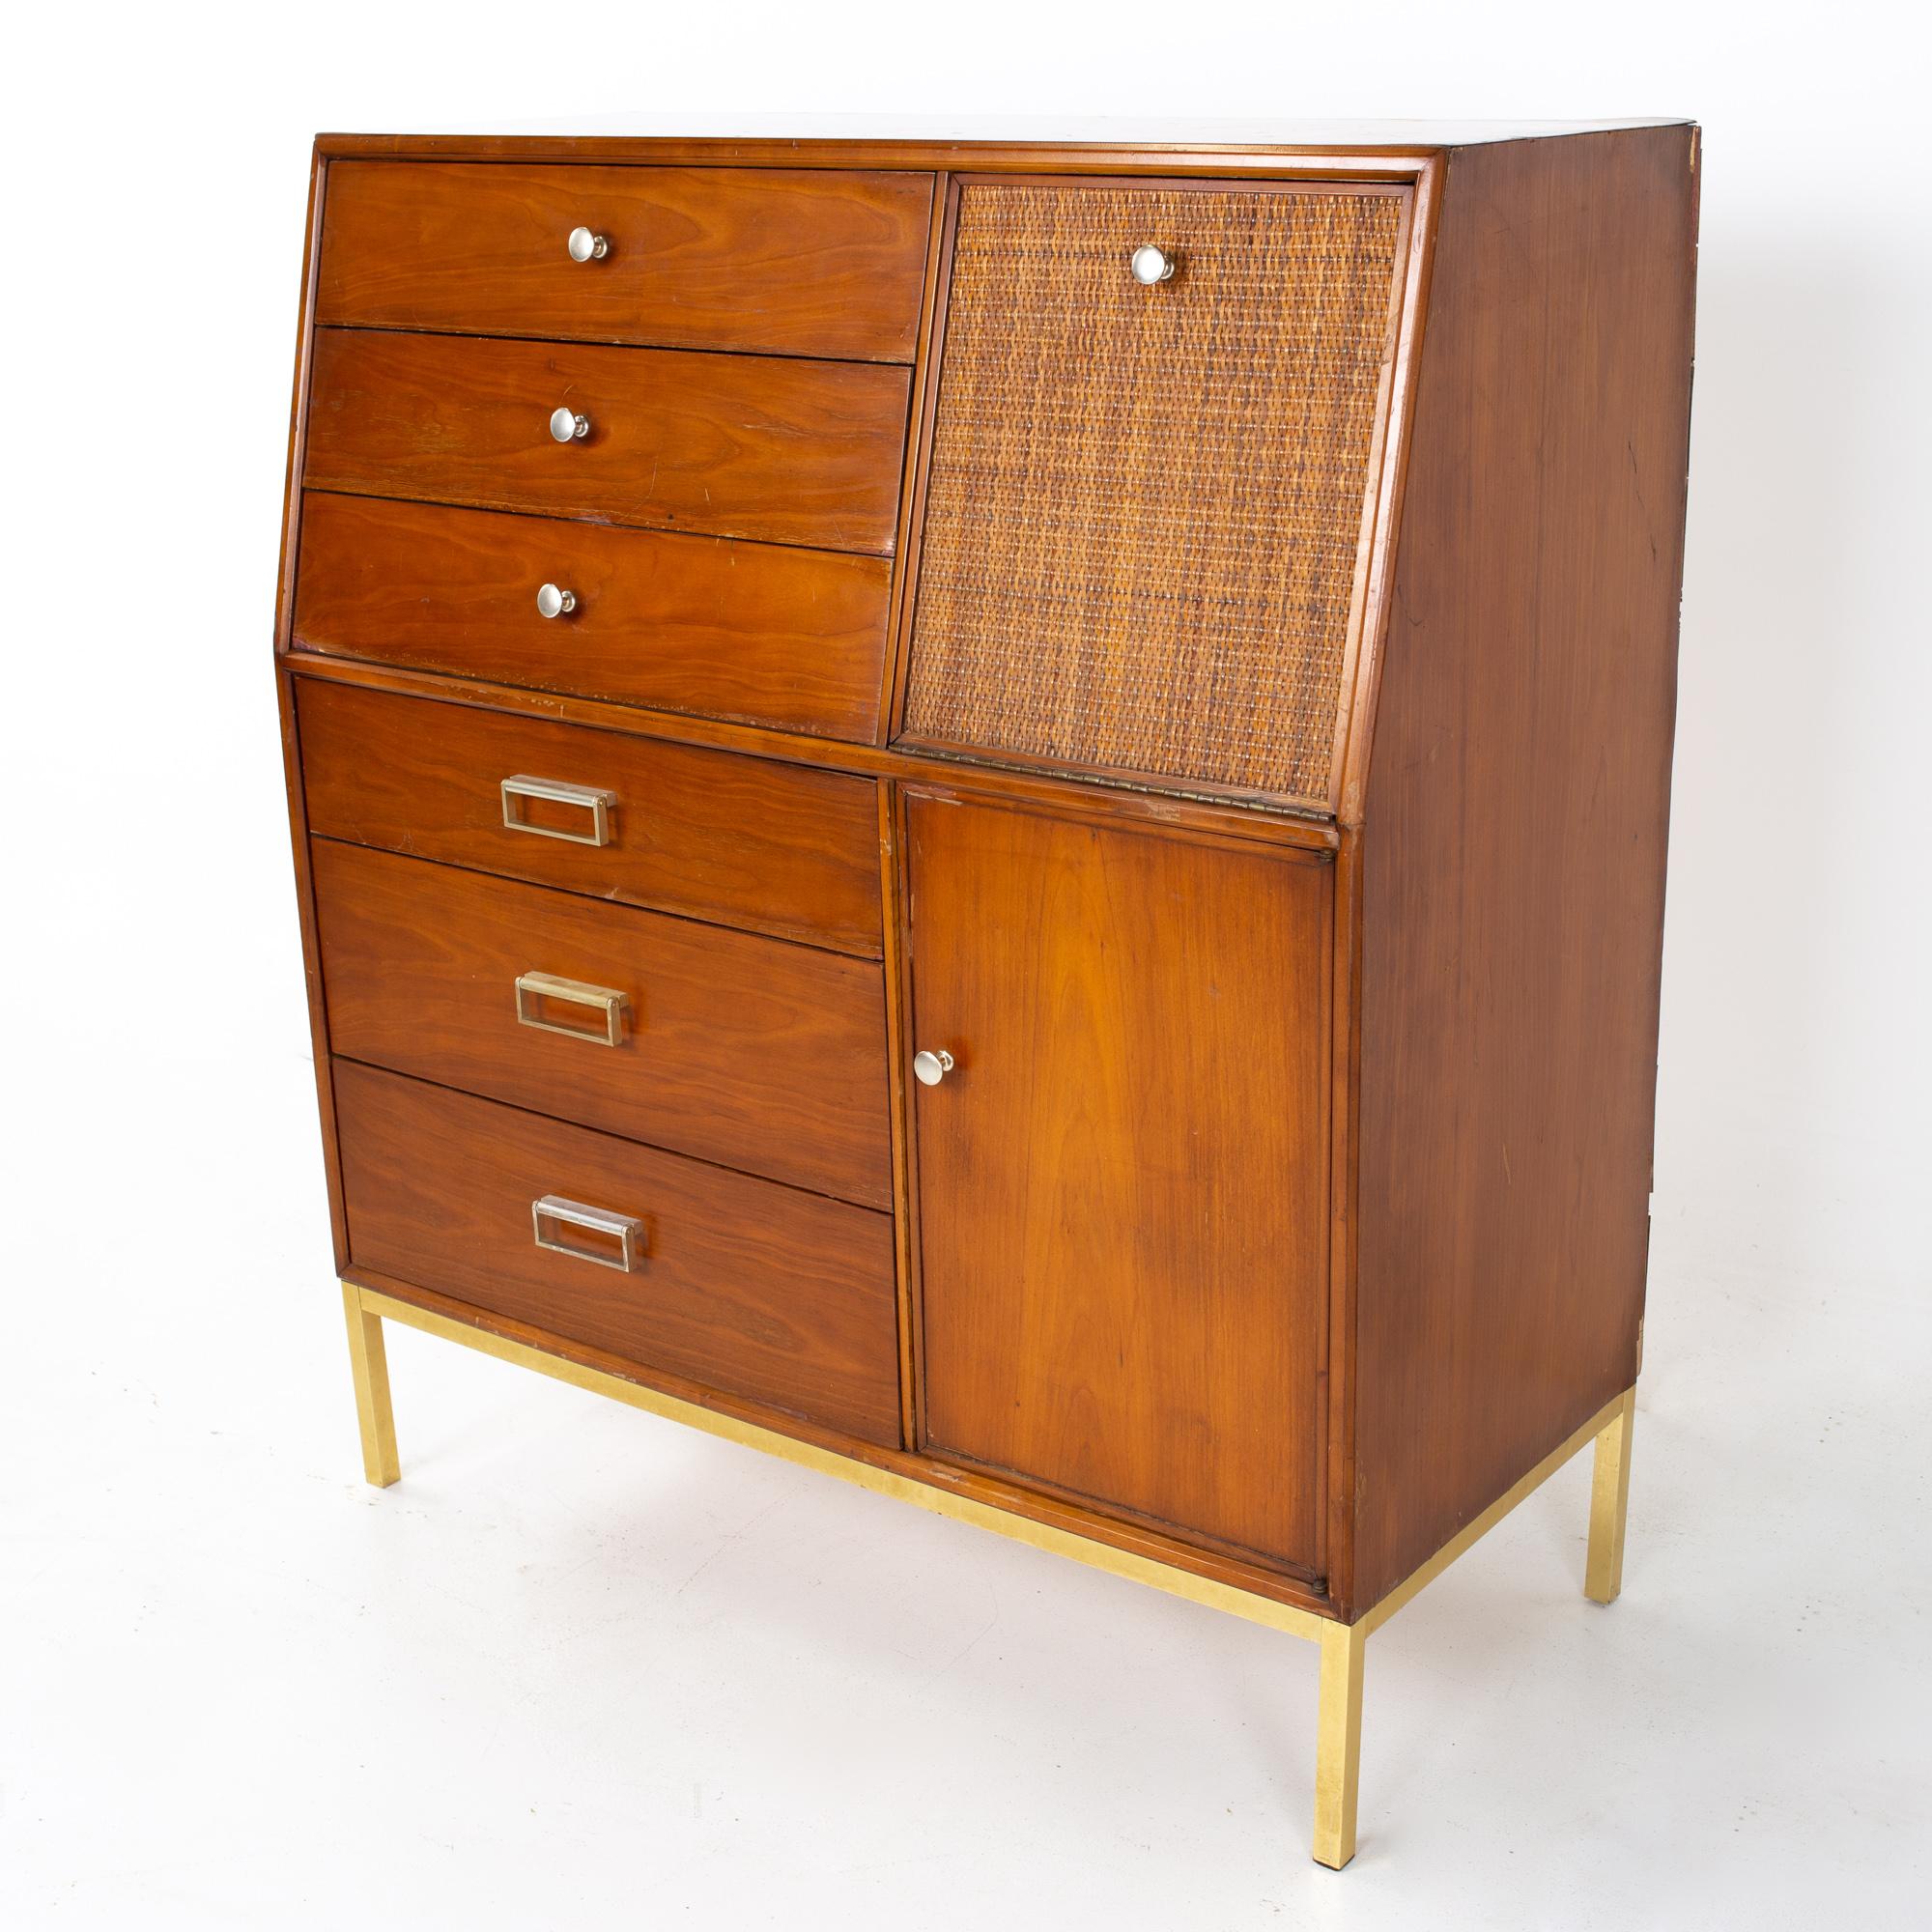 Kipp Stewart for Drexel Suncoast mid century walnut brass and cane gentleman's chest highboy dresser
Dresser measures: 40 wide x 18 deep x 46 inches high

All pieces of furniture can be had in what we call restored vintage condition. That means